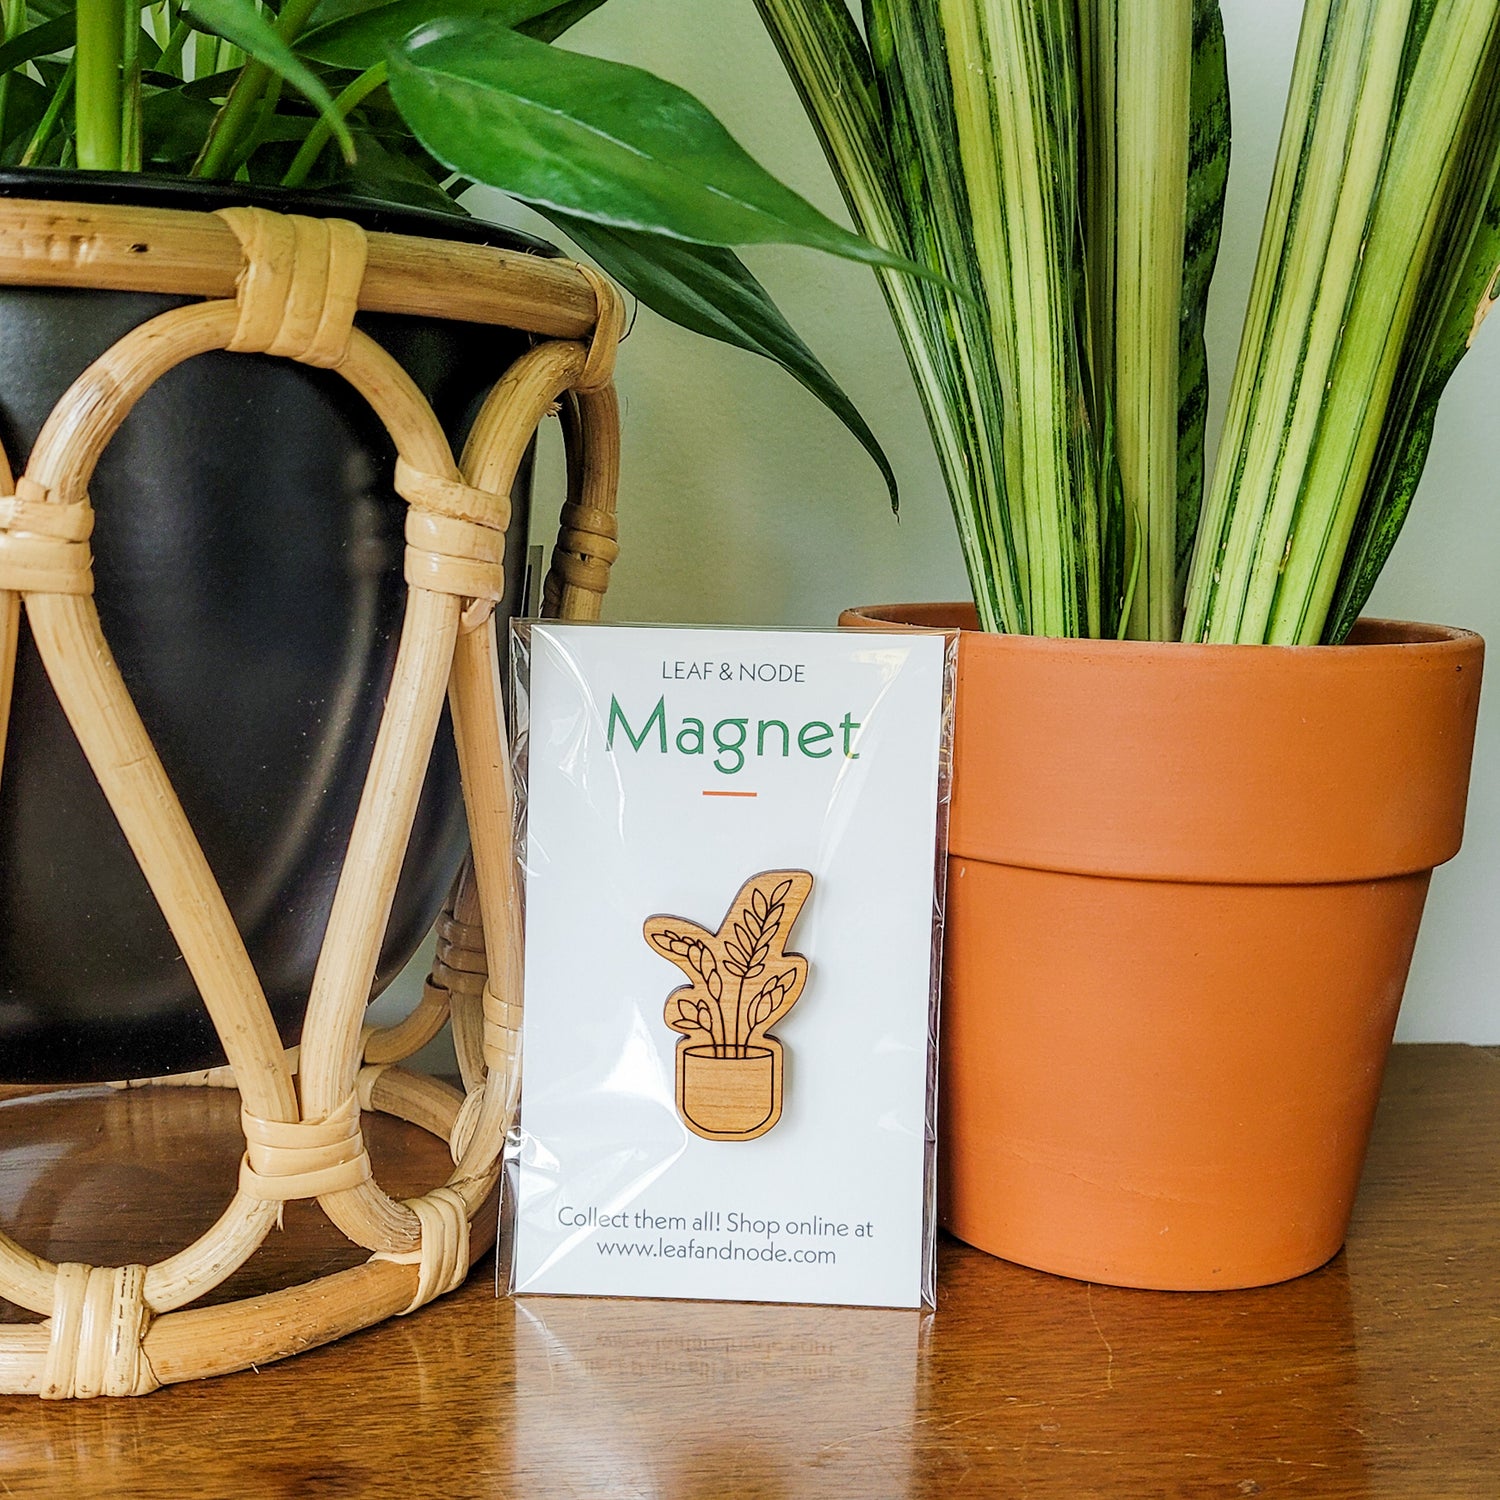 Handcrafted magnet featuring a ZZ plant engraved in cherry wood in product packaging sitting on an end table with two houseplants.